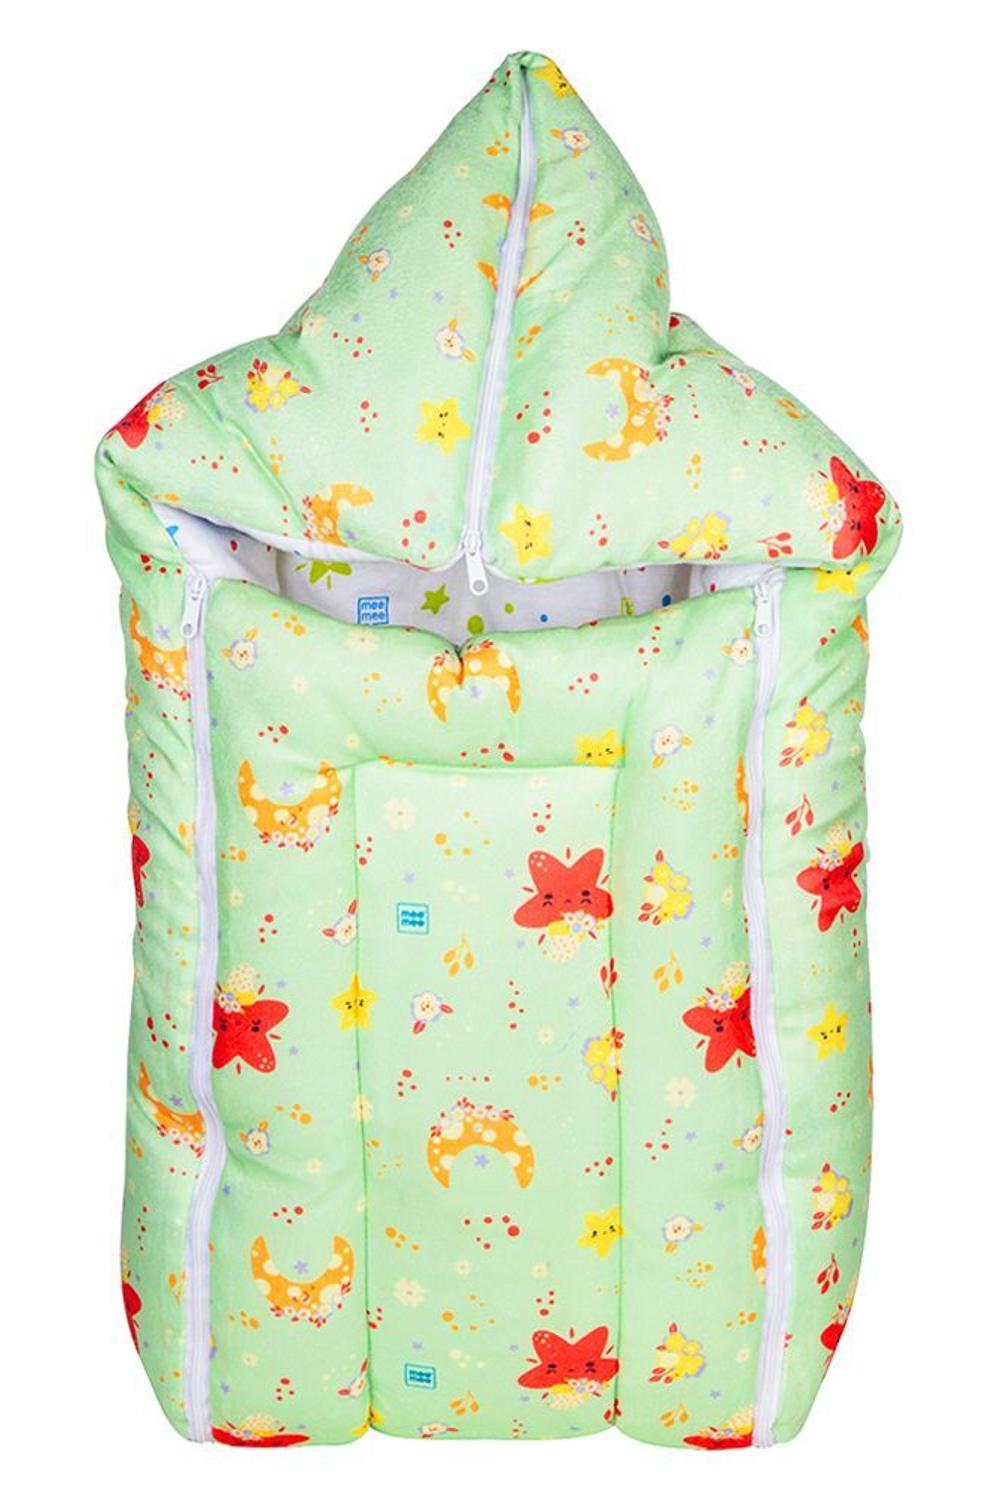 Mee Mee 3 in 1 Baby Carry Nest with Sleeping Bag and Mattress for Newborn (Green) ( Star Print)